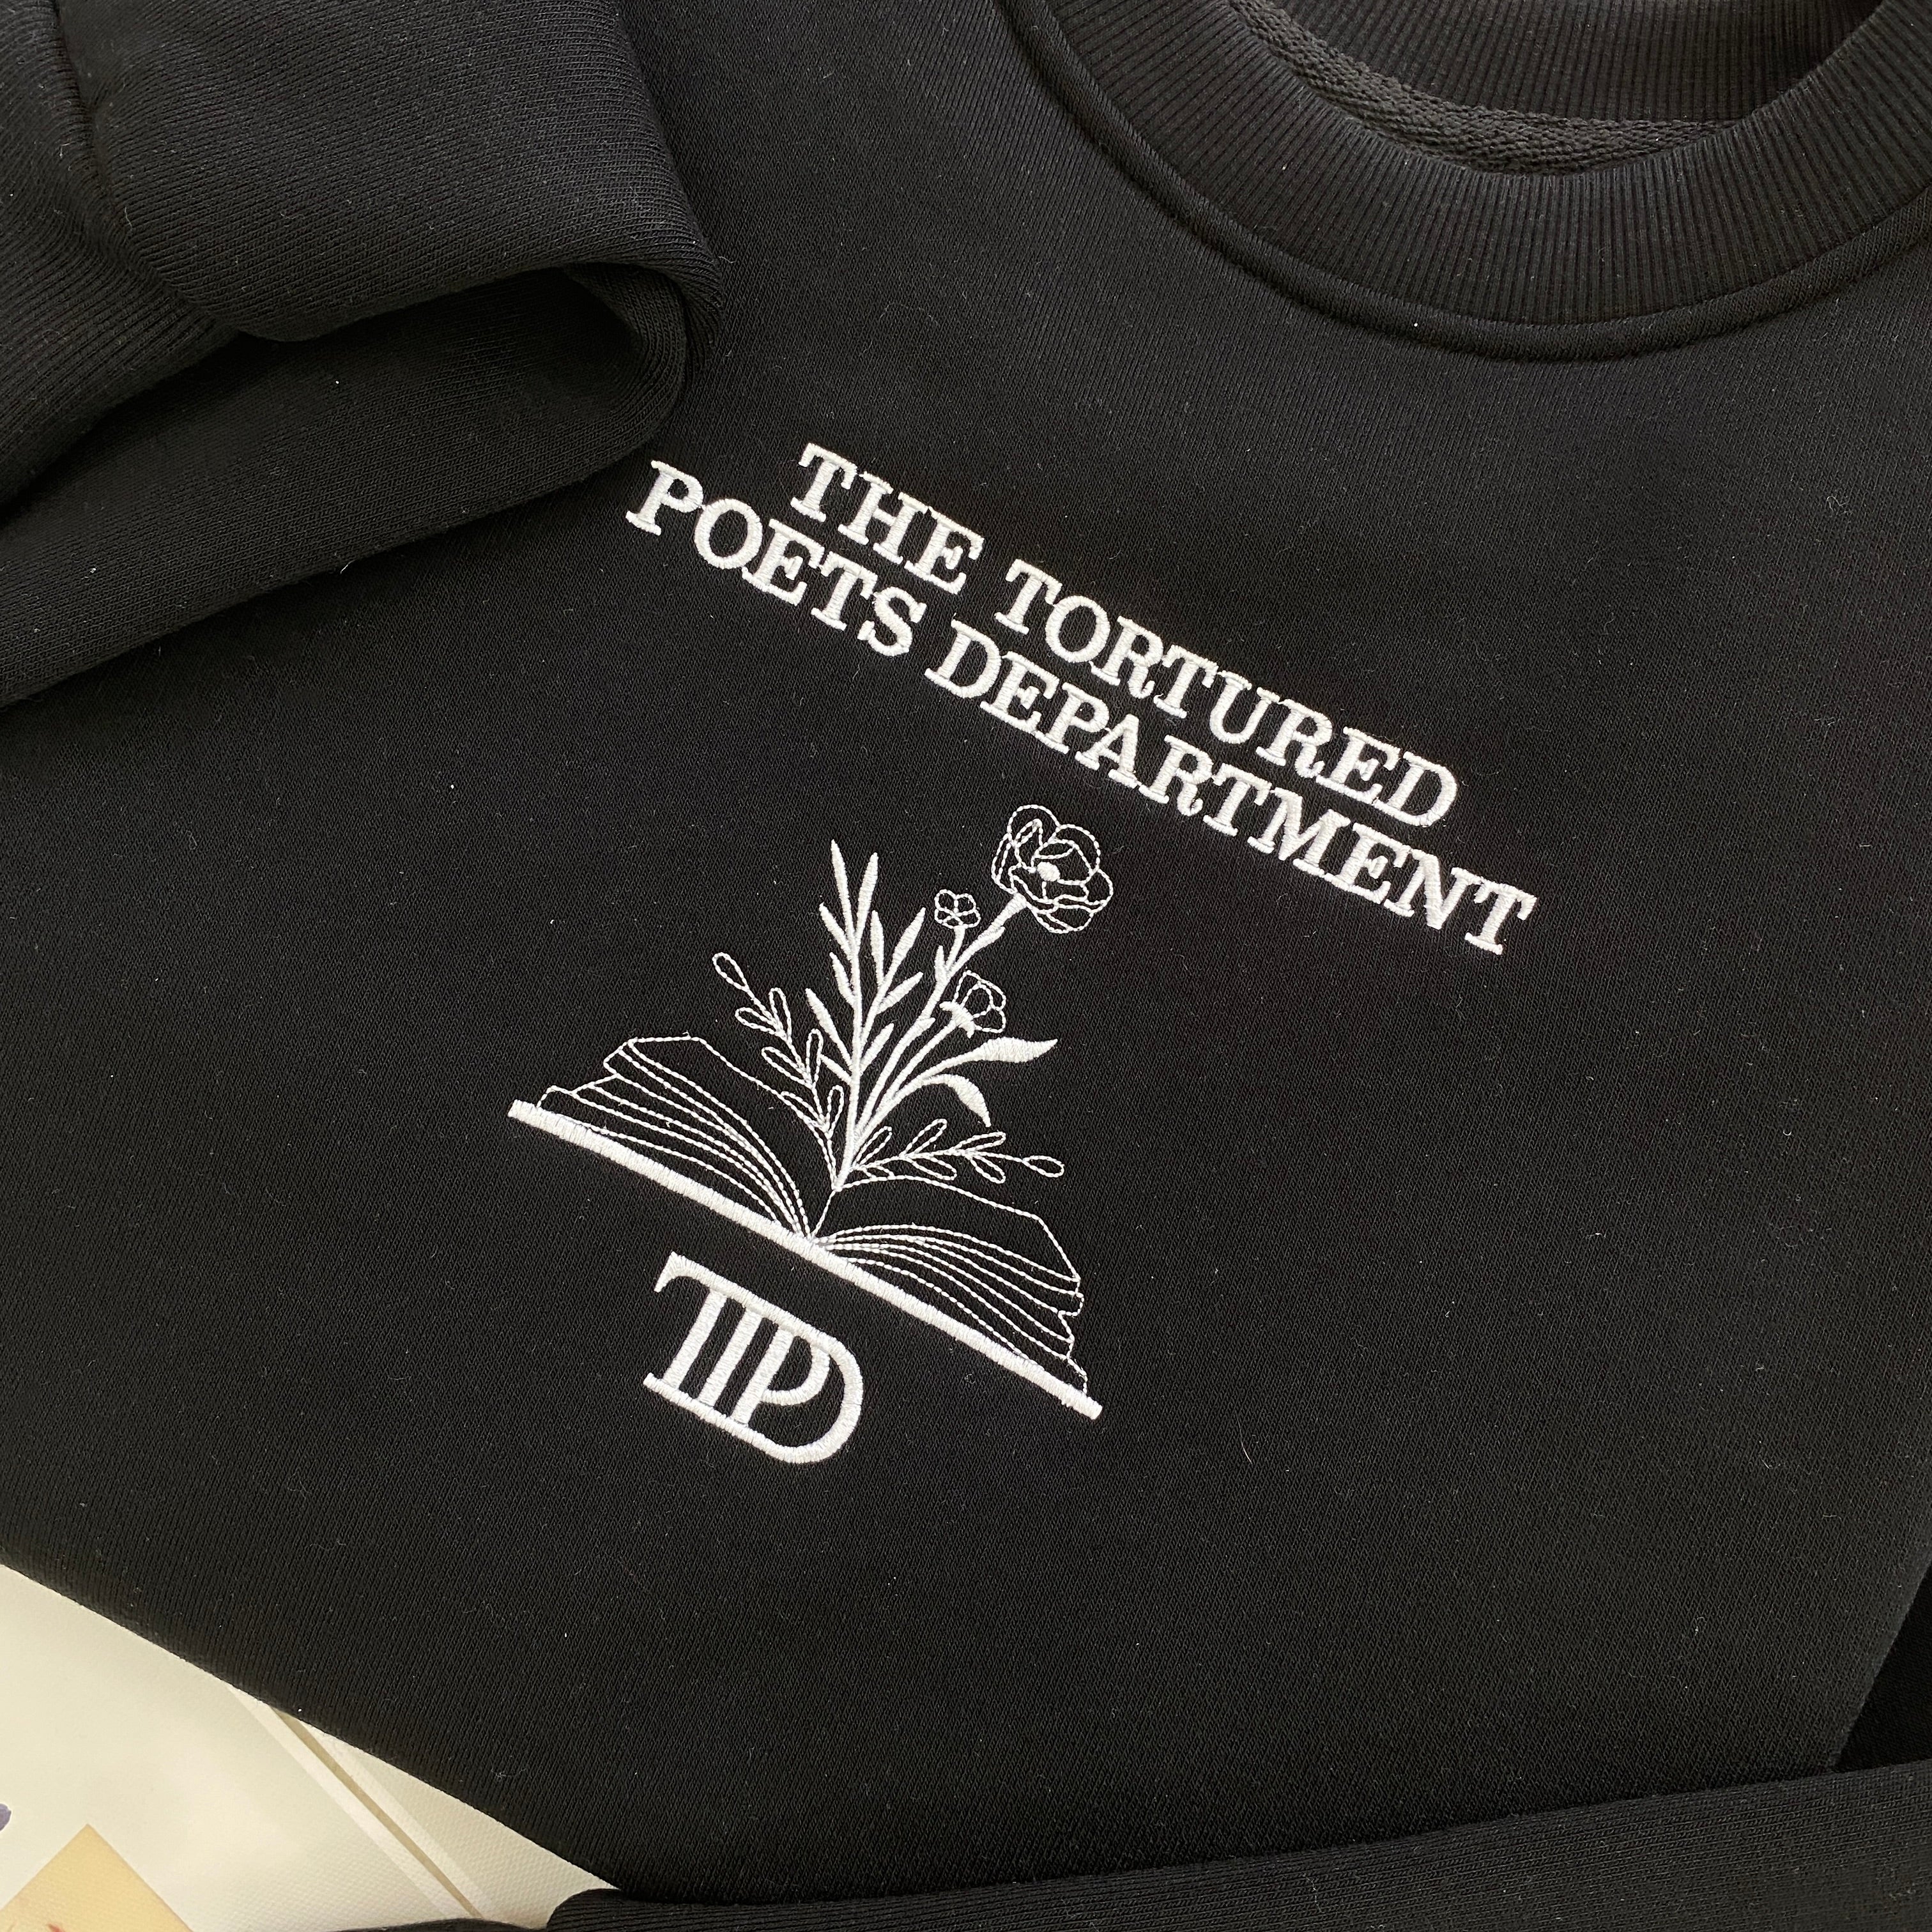 the tortured poet department book with flower new album embroidered shirt 1714379656869.jpg